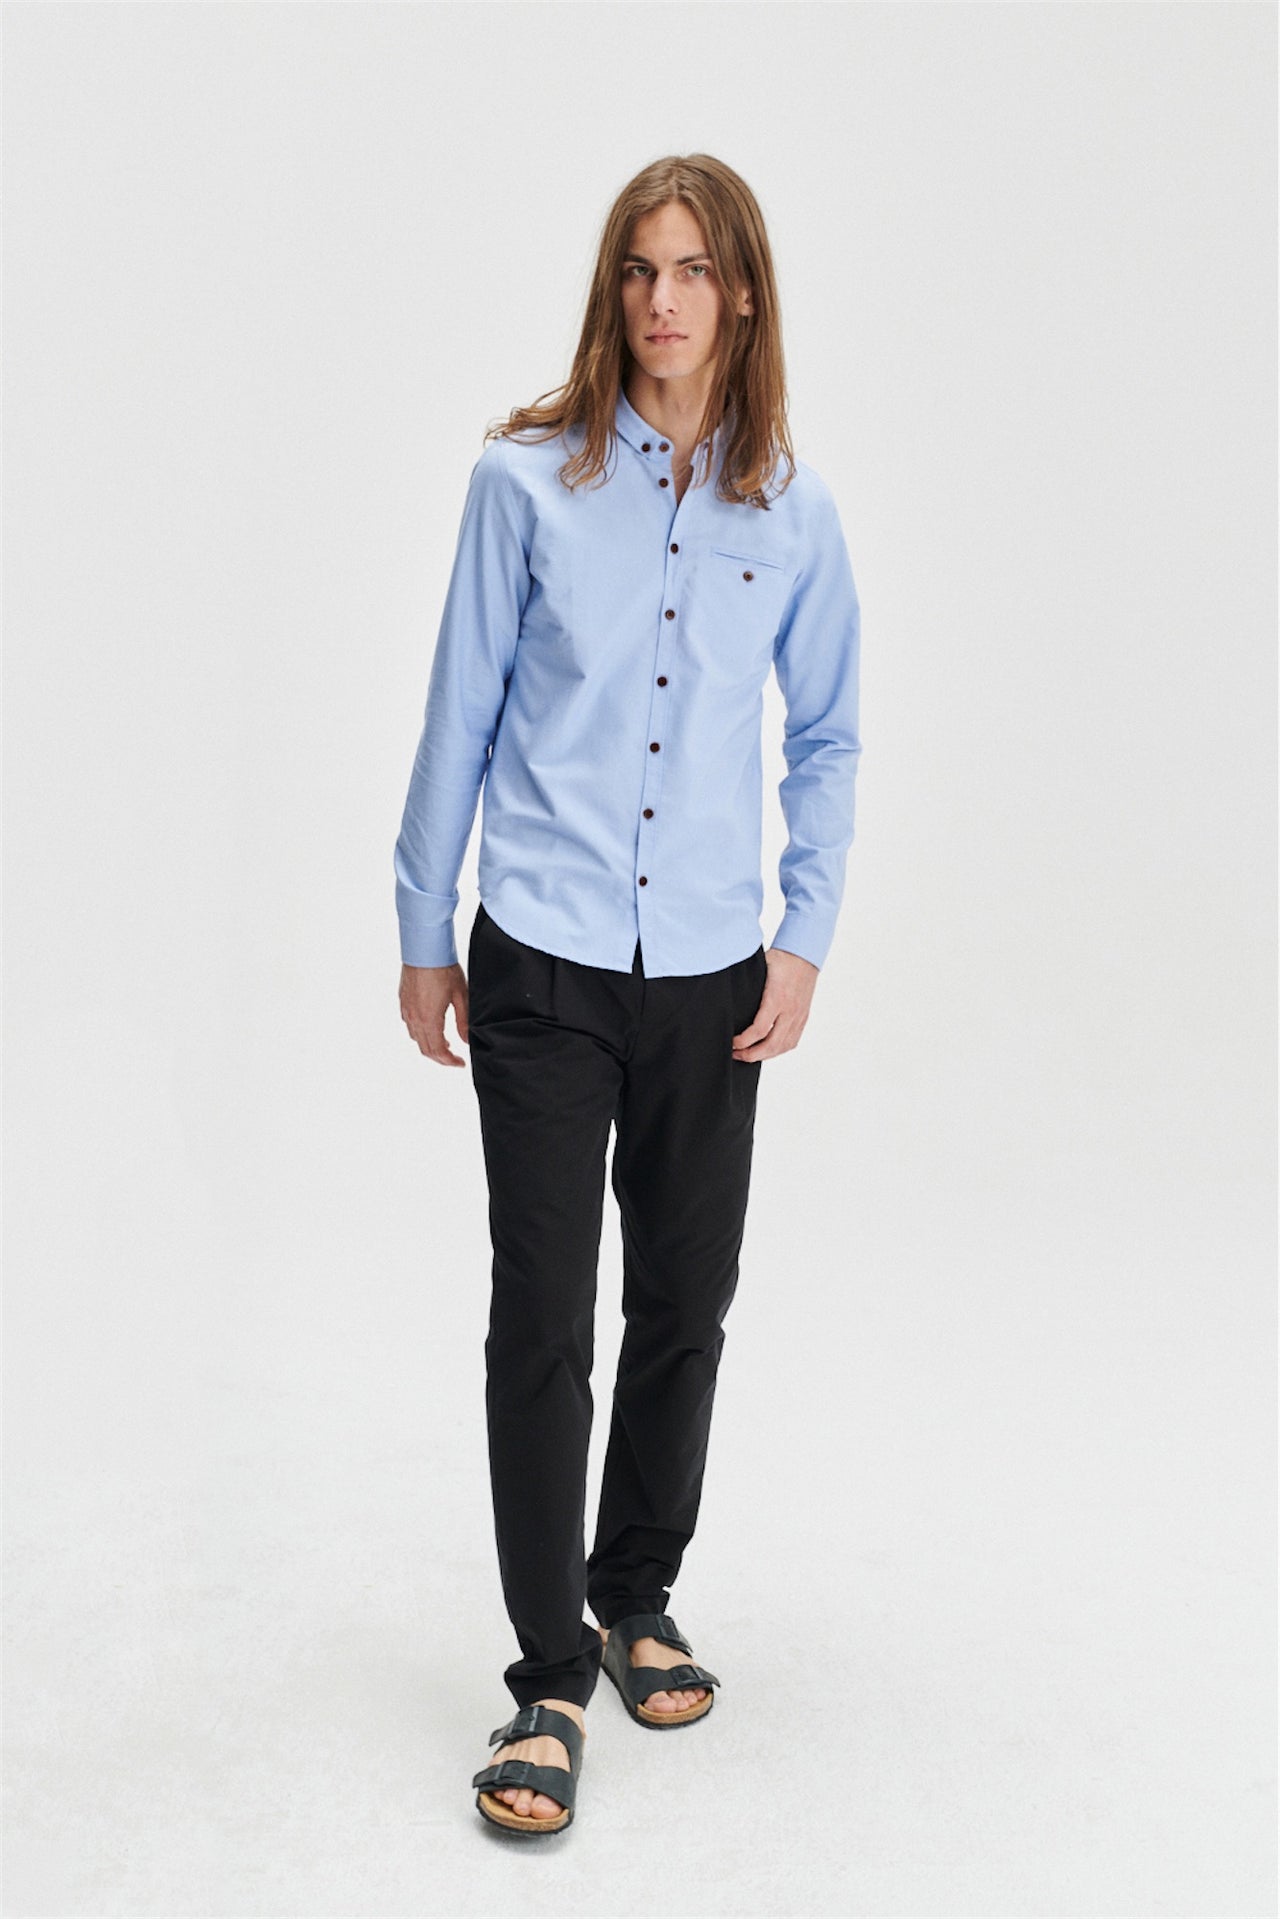 Proper Shirt in the Finest Blue Portuguese Oxford Cotton with Wooden Buttons